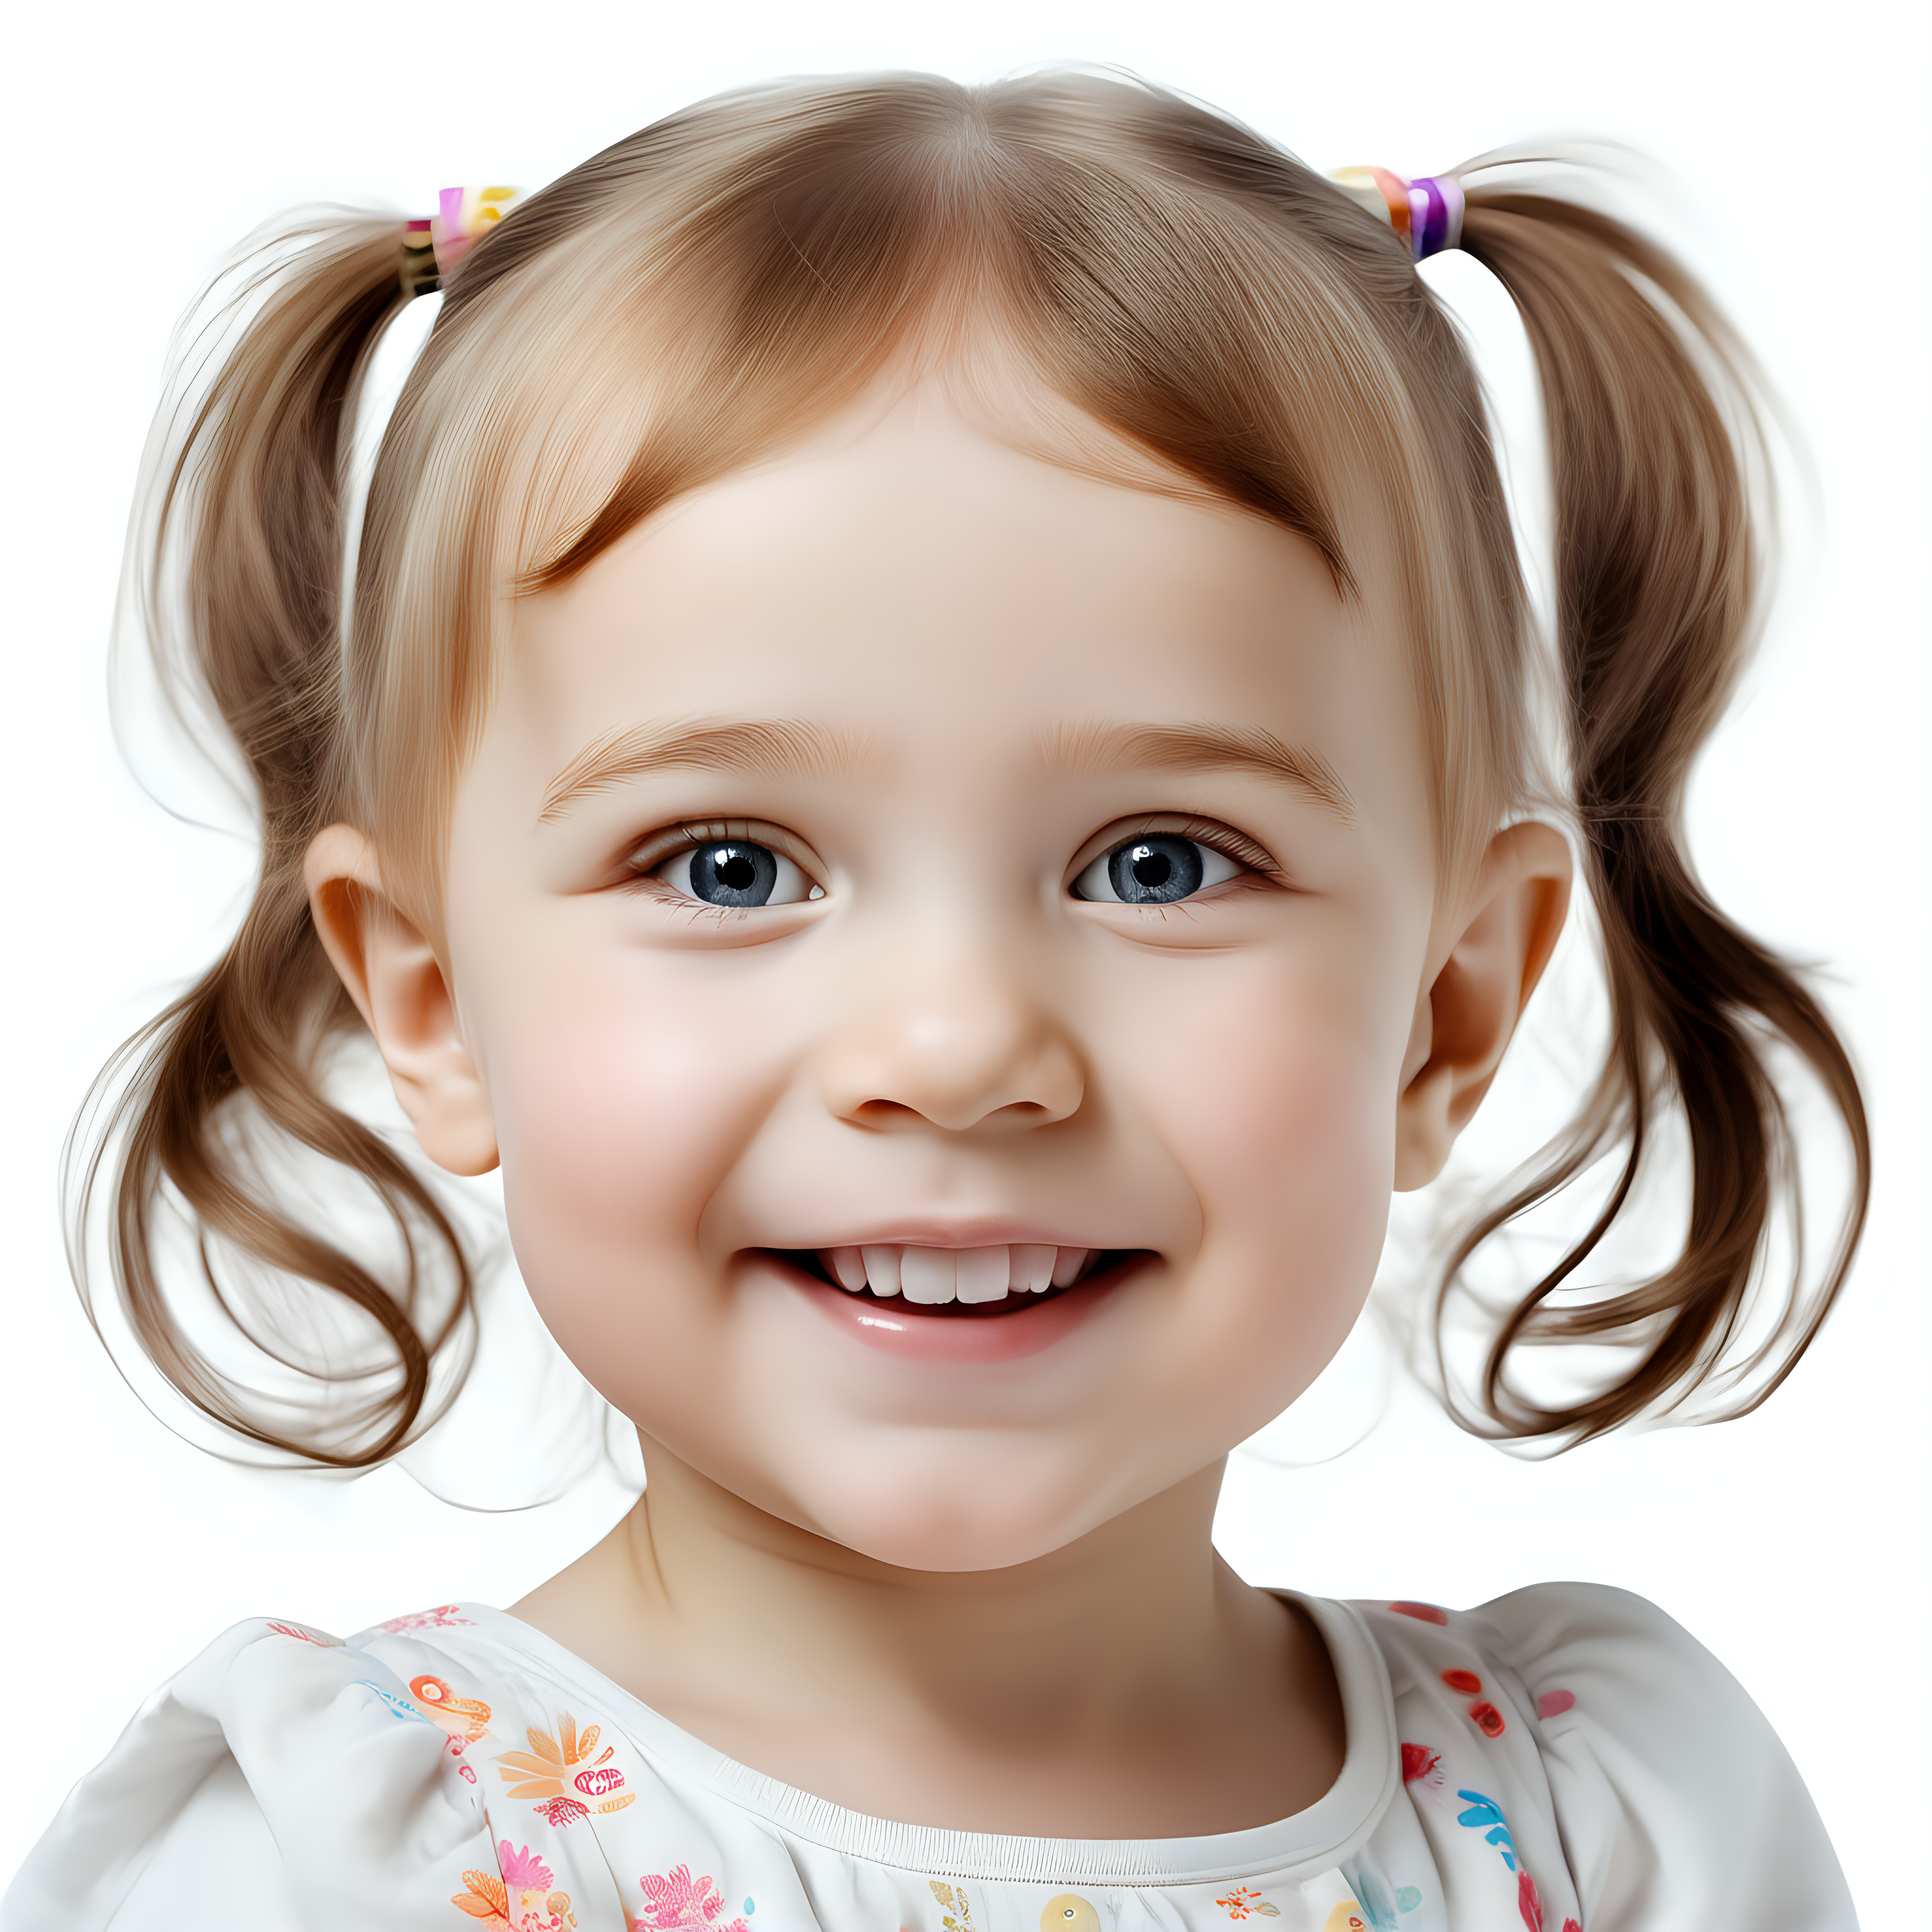 white backgroundreal facewhole headchild 3 yearsold girlscharacteristic human